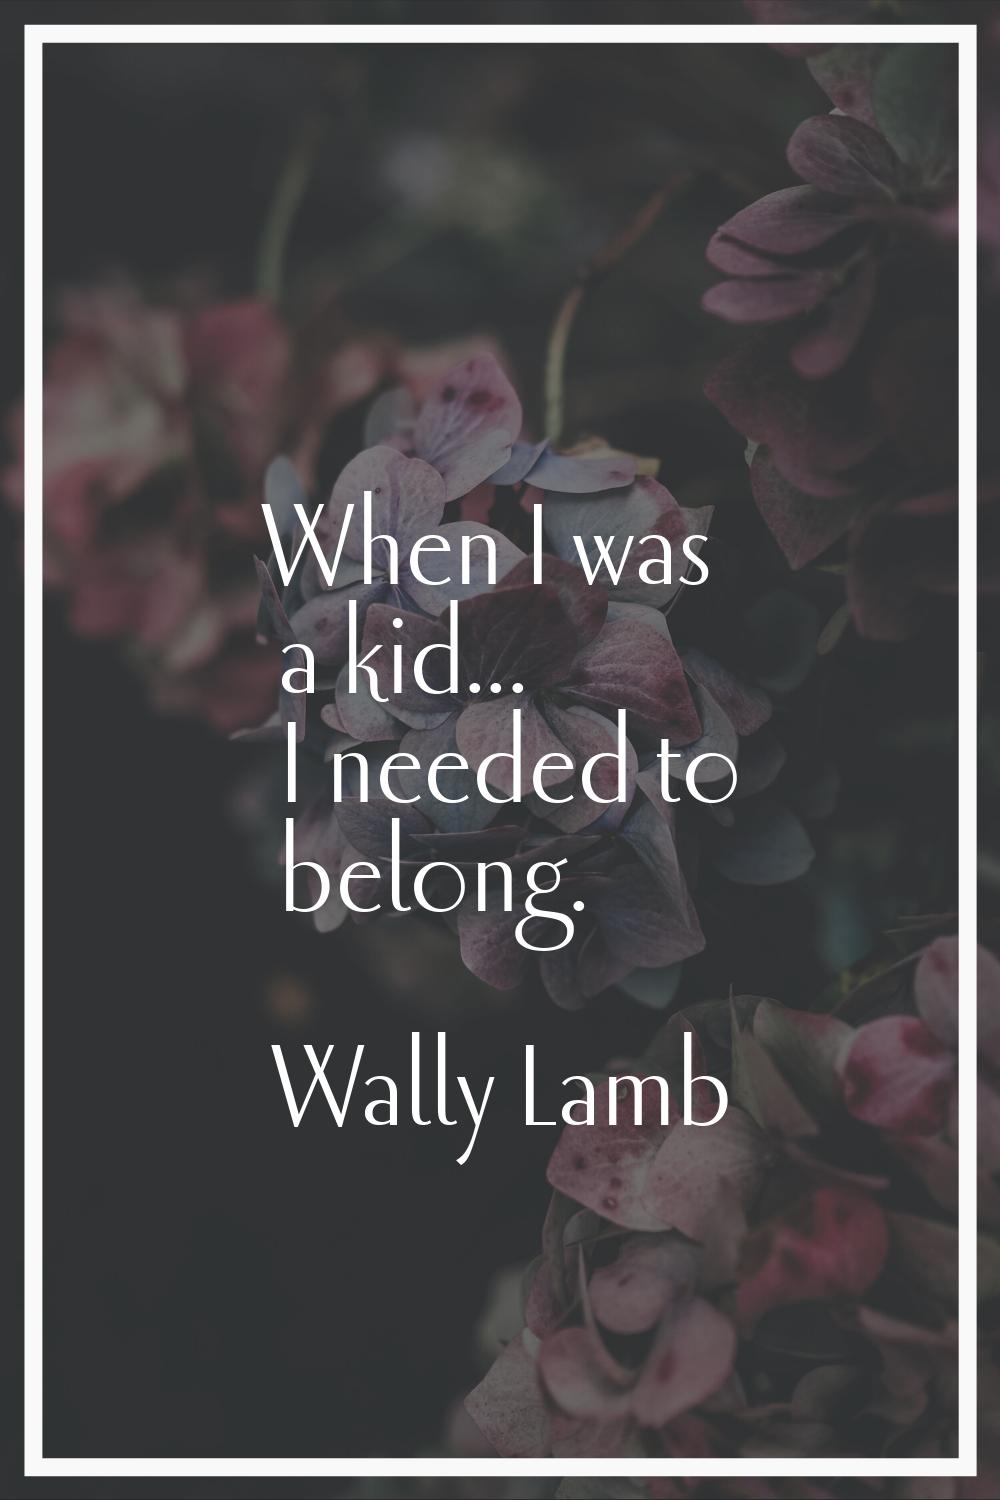 When I was a kid... I needed to belong.